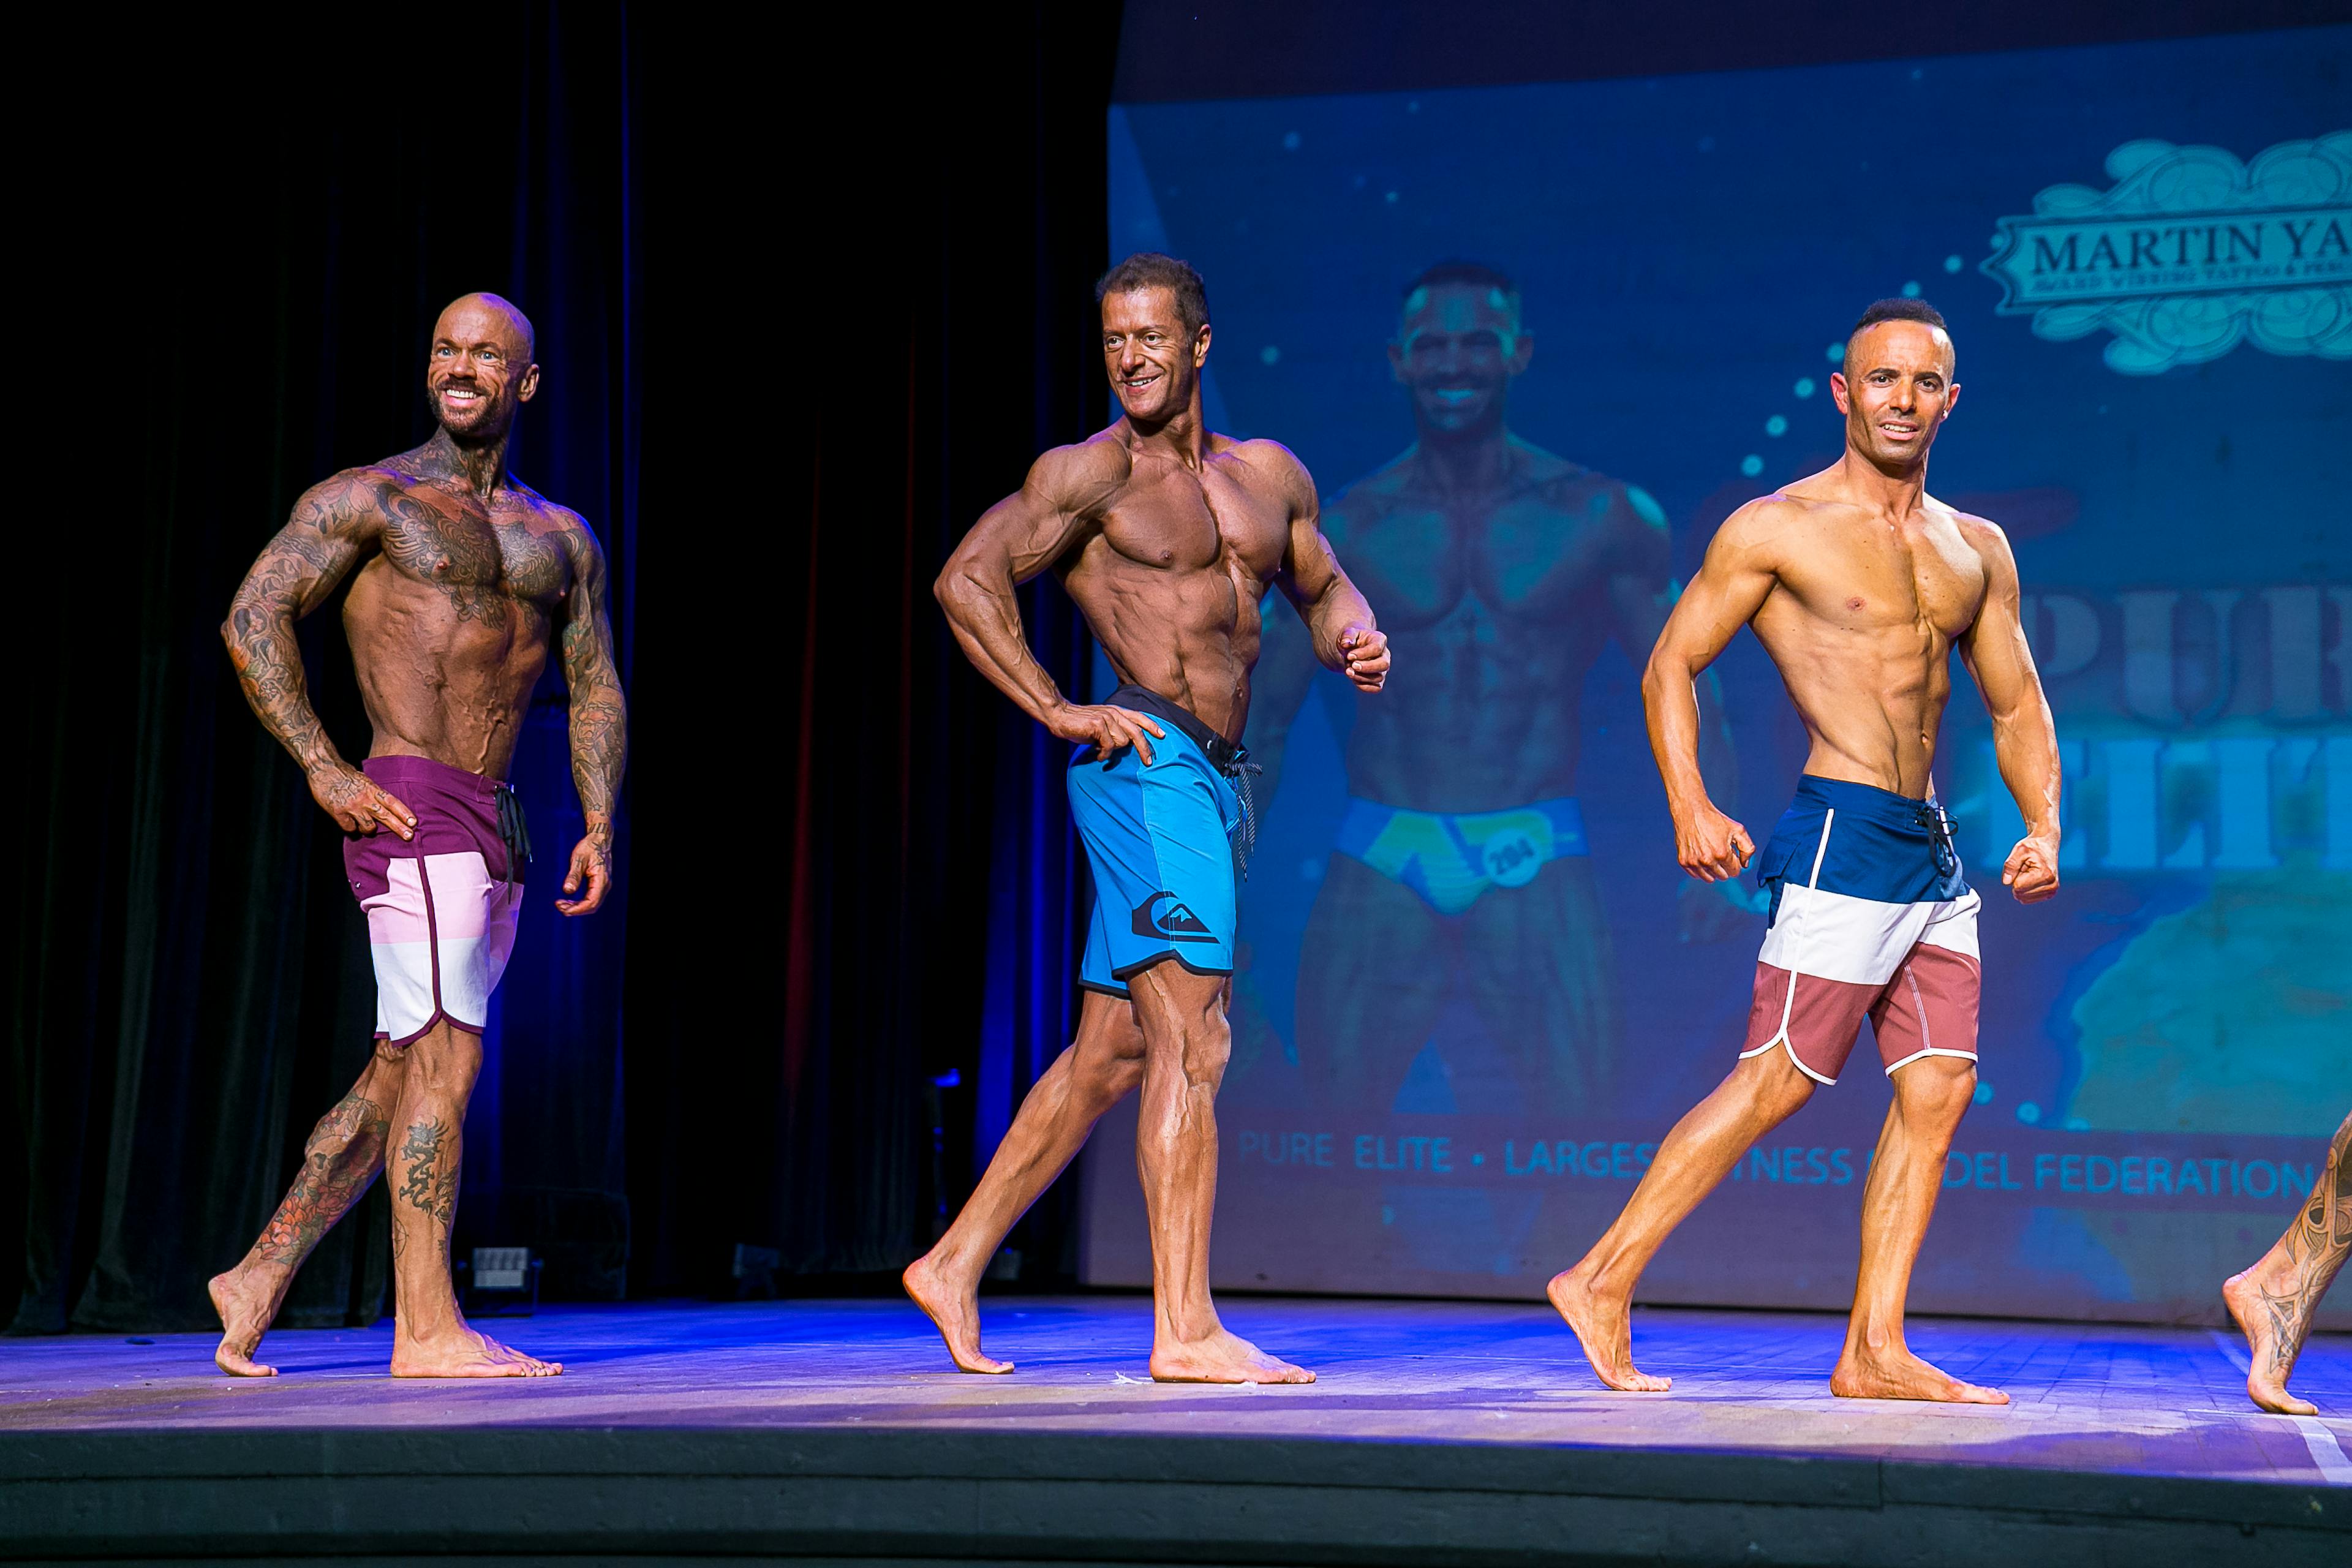 Kishore Naib competing in men's physique